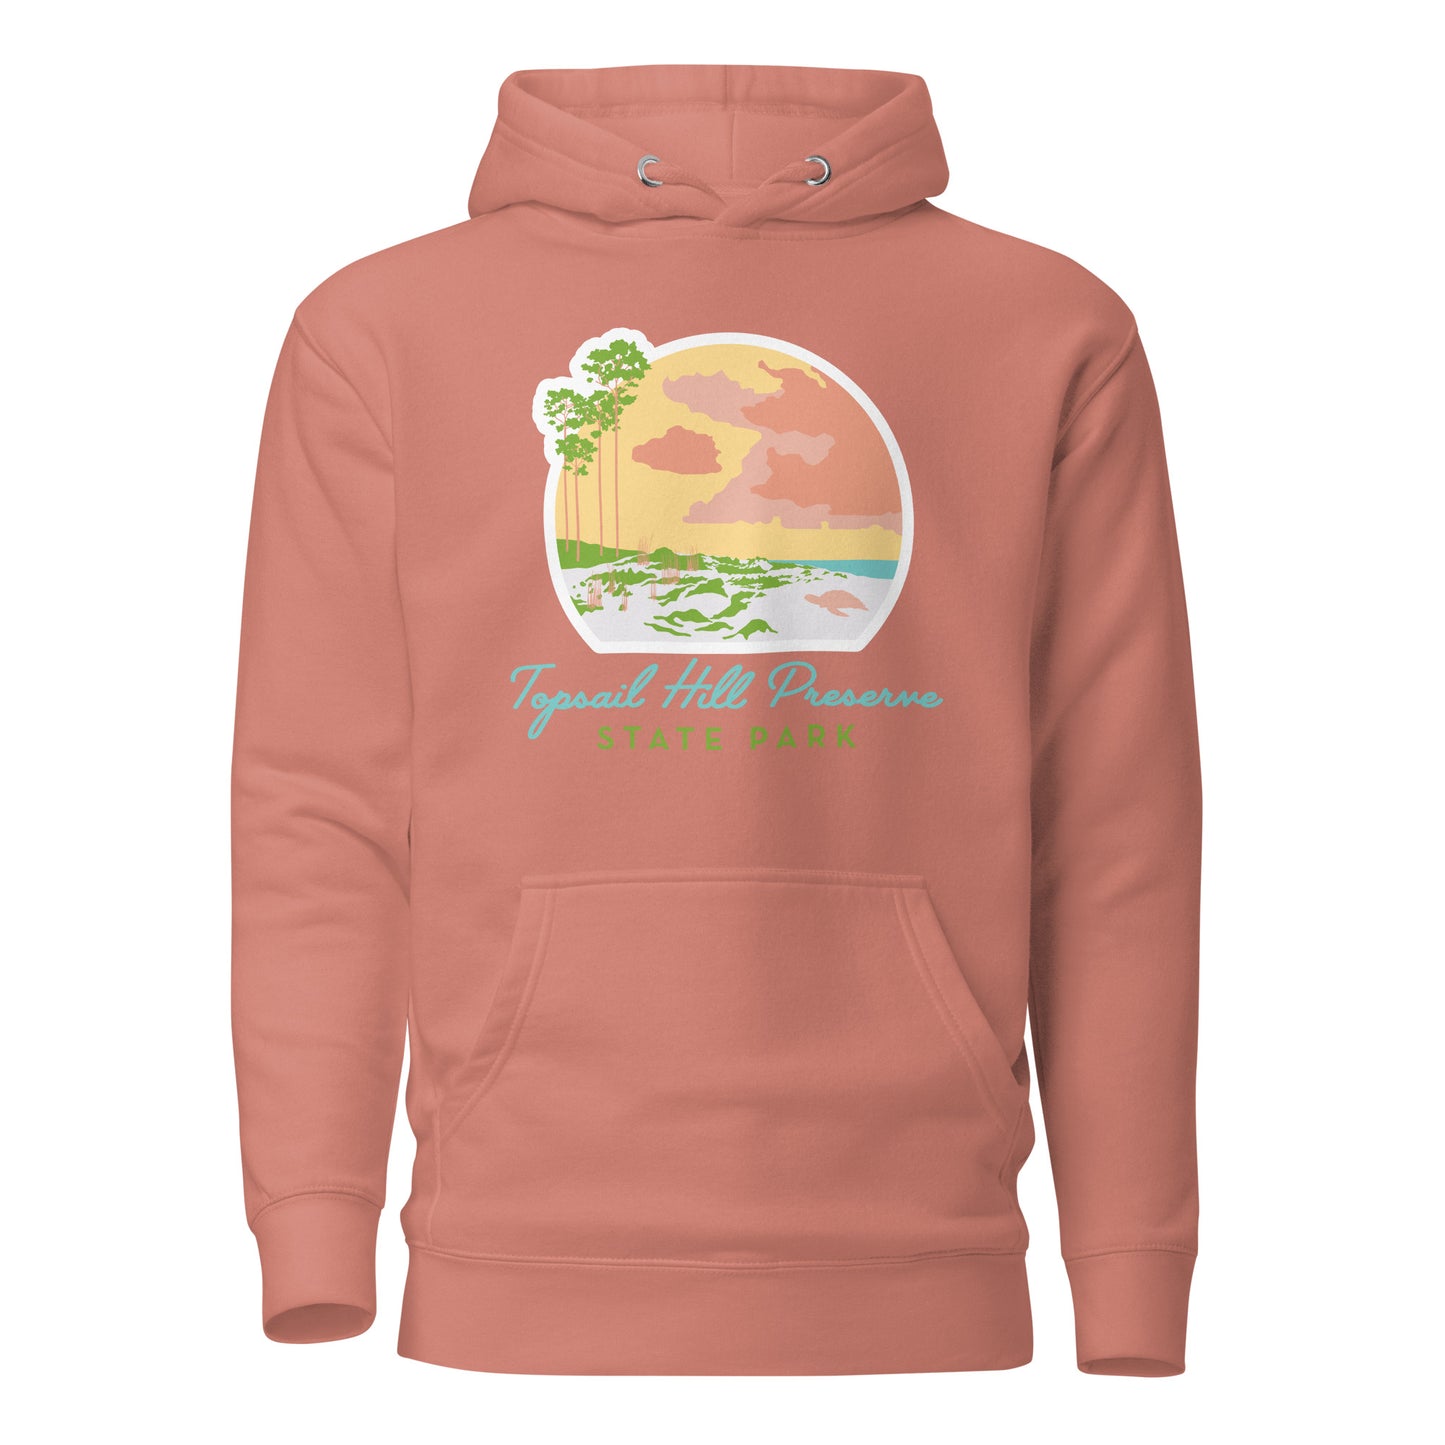 Topsail Hill Preserve Unisex Hoodie by AMLgMATD - Live Wildly 